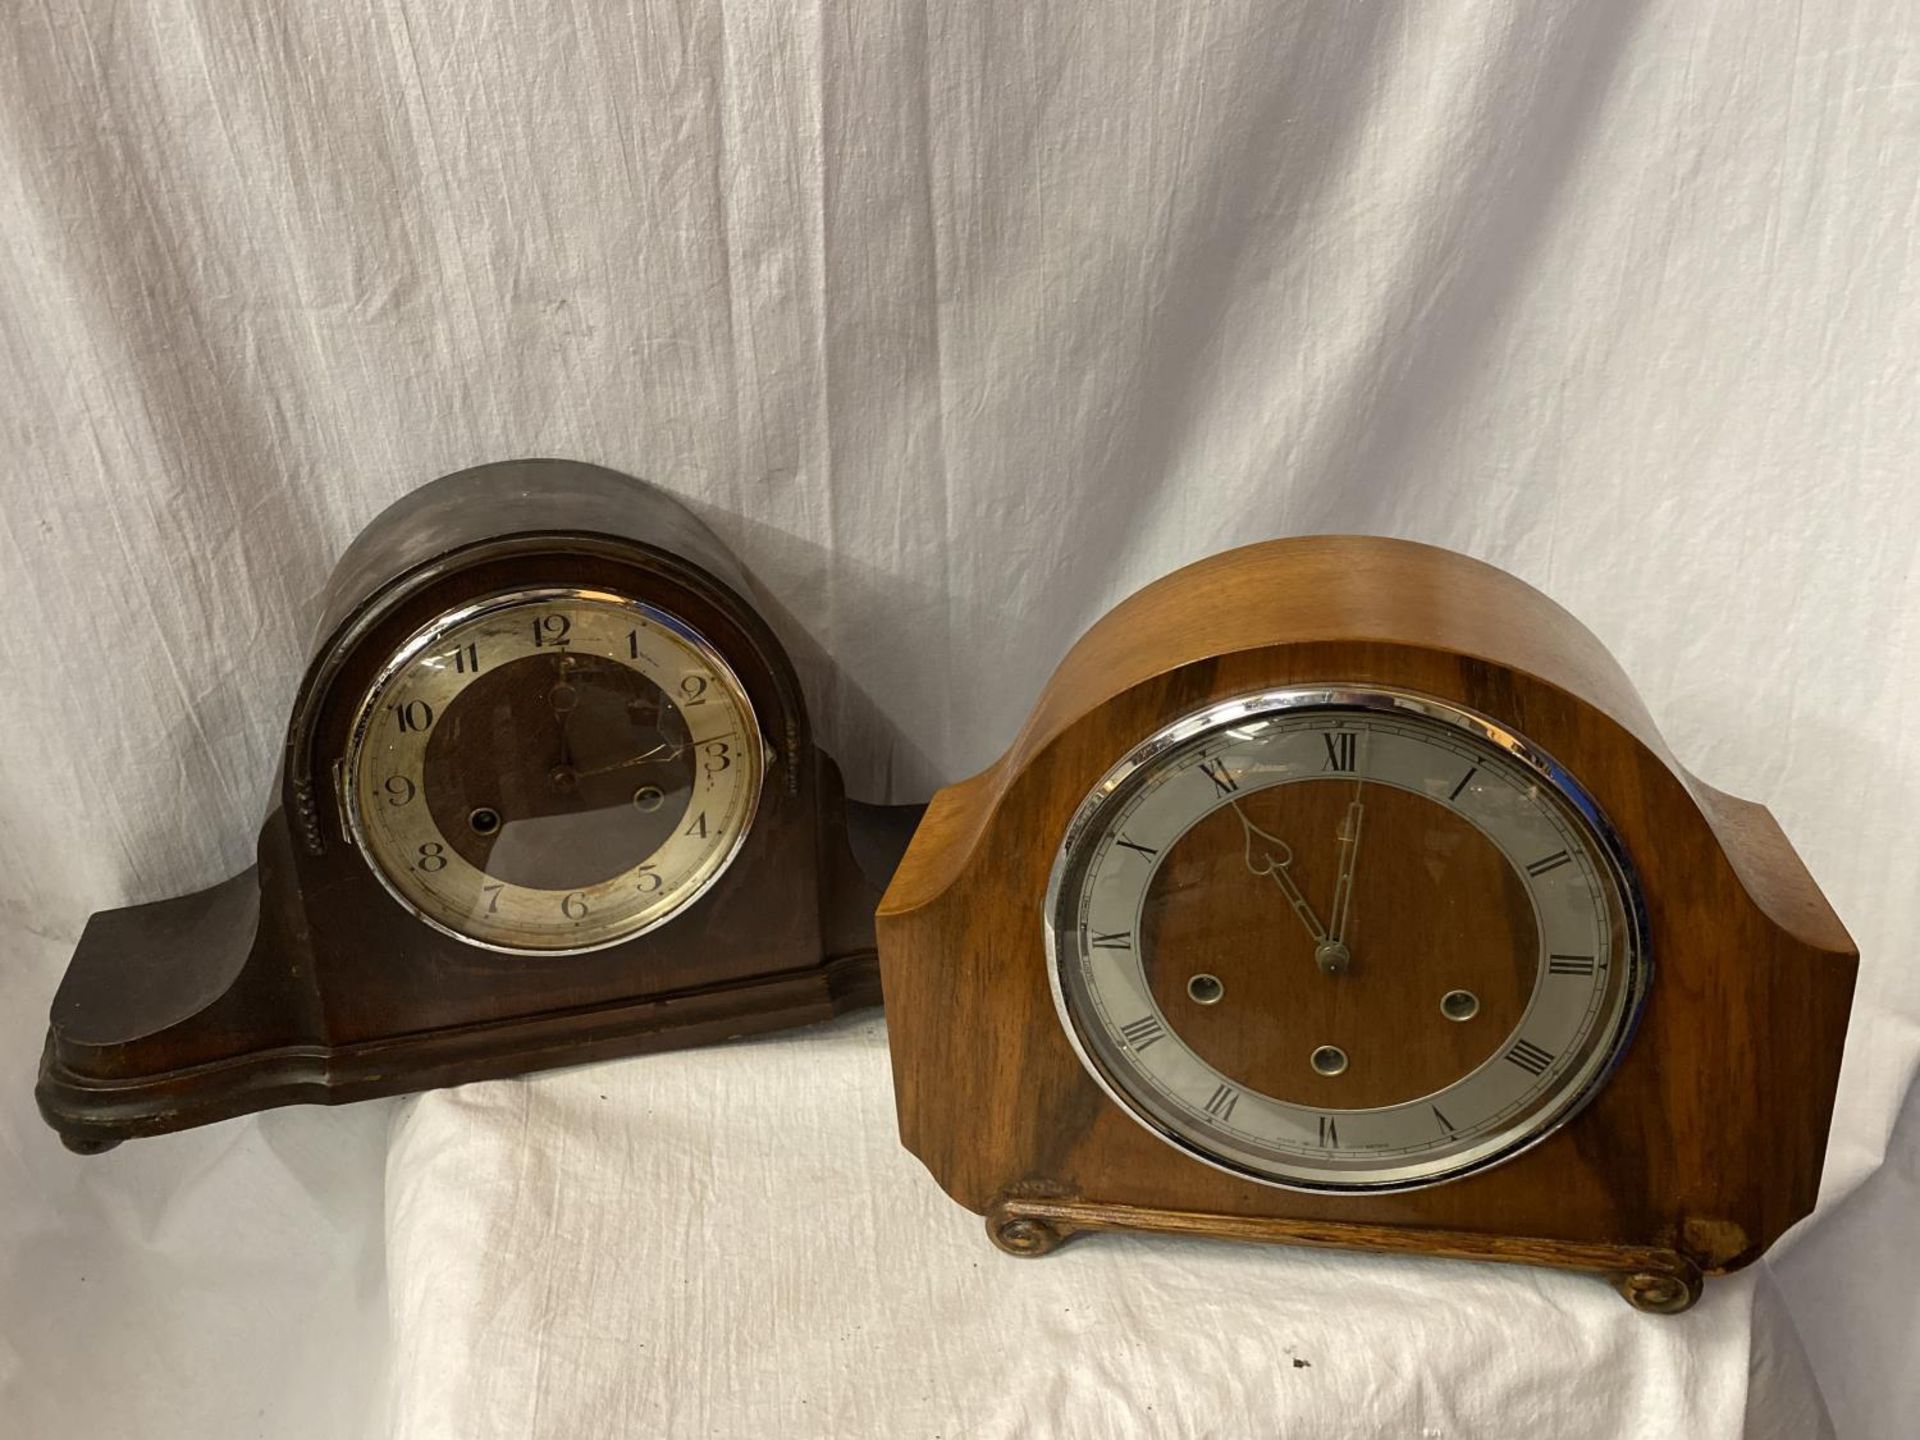 TWO MANTEL CLOCKS, ONE A MAHOGANY NAPOLEON HAT EXAMPLE AND THE OTHER AN ART DECO STYLE